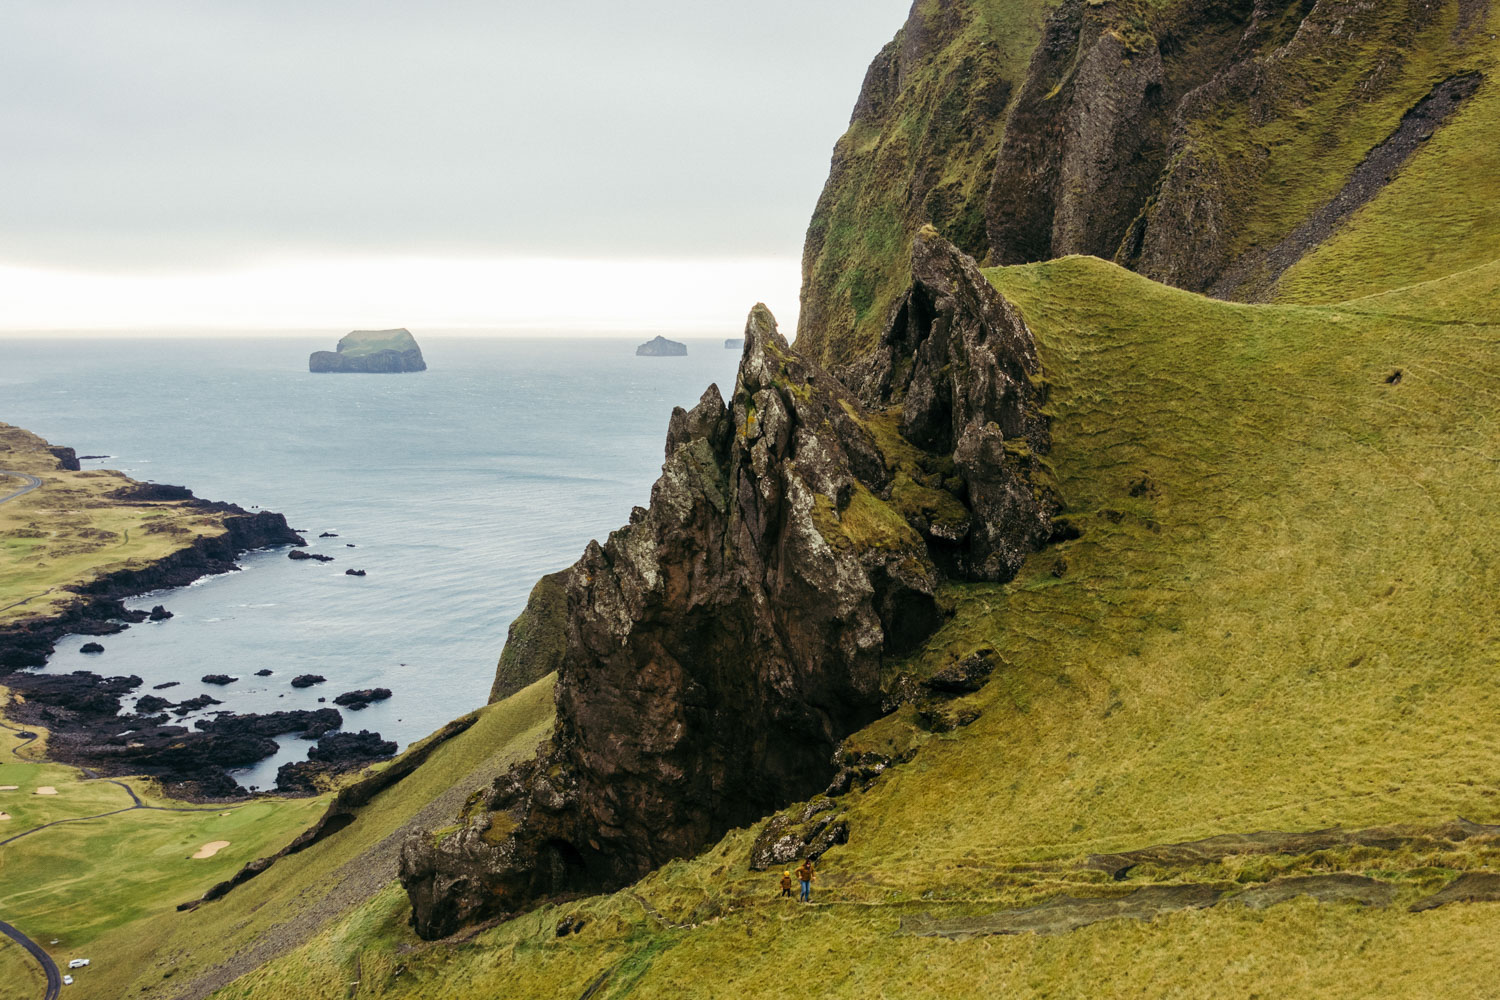 Image of tiny figures climbing a steep mountain track on a hill in Vestmannaeyjar, with ocean in background